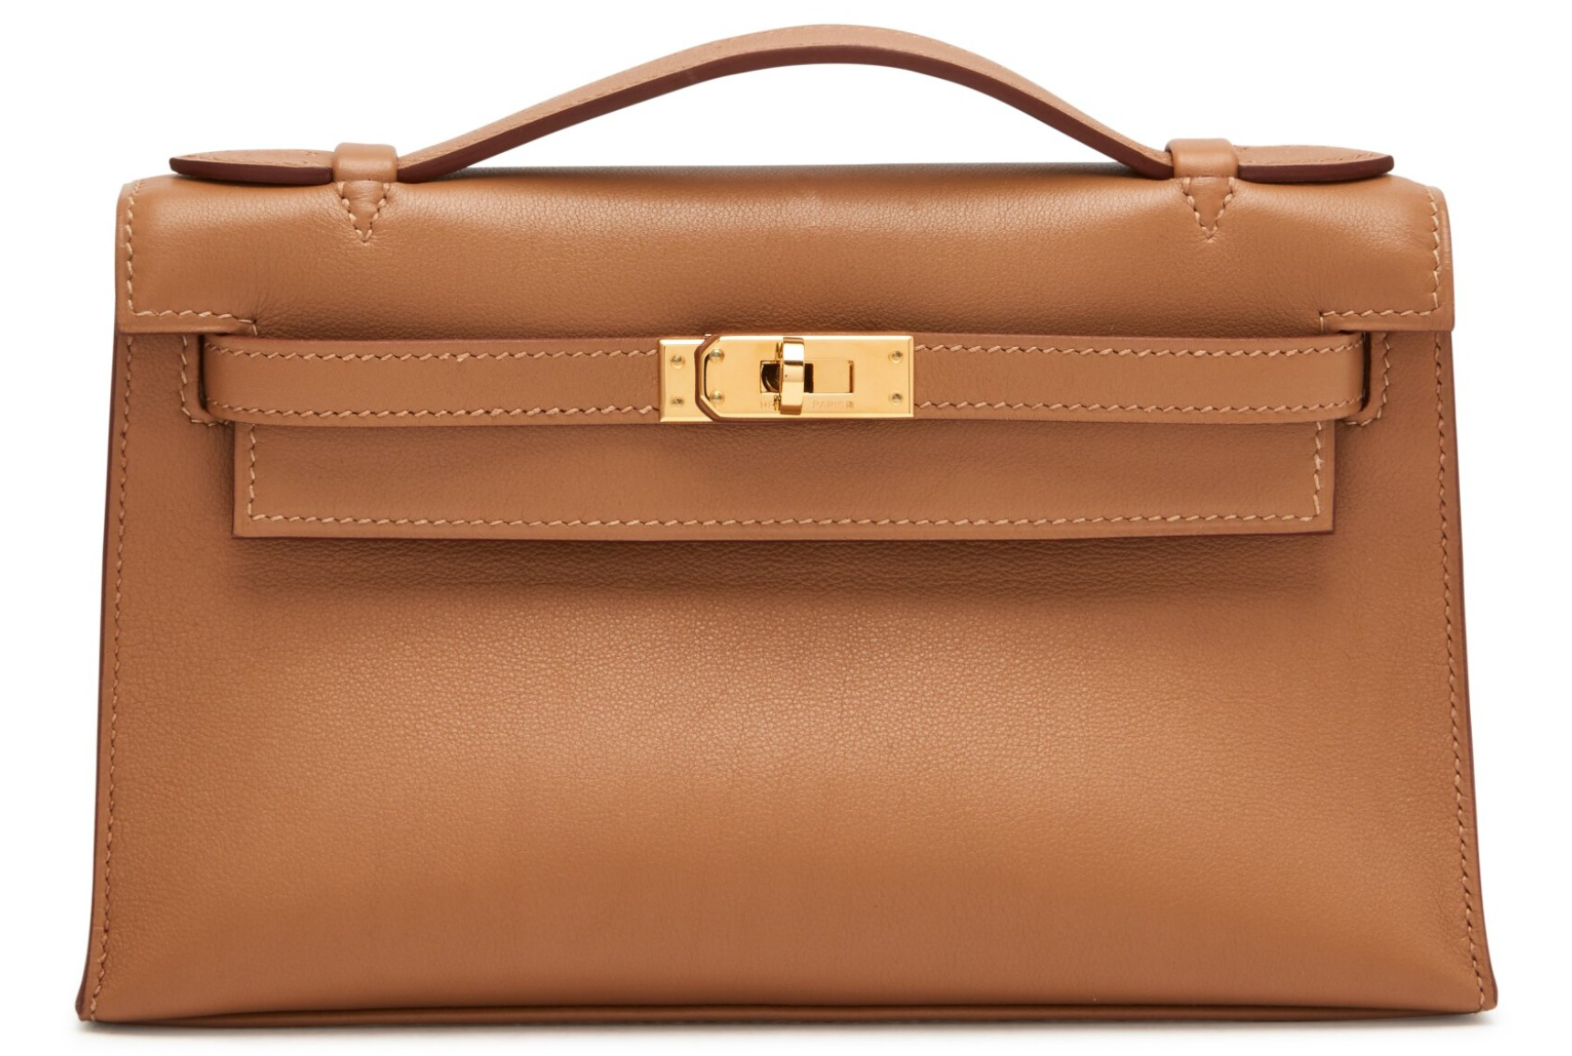 What To Know About Hermès' Kelly, The Original “Old Money” Bag